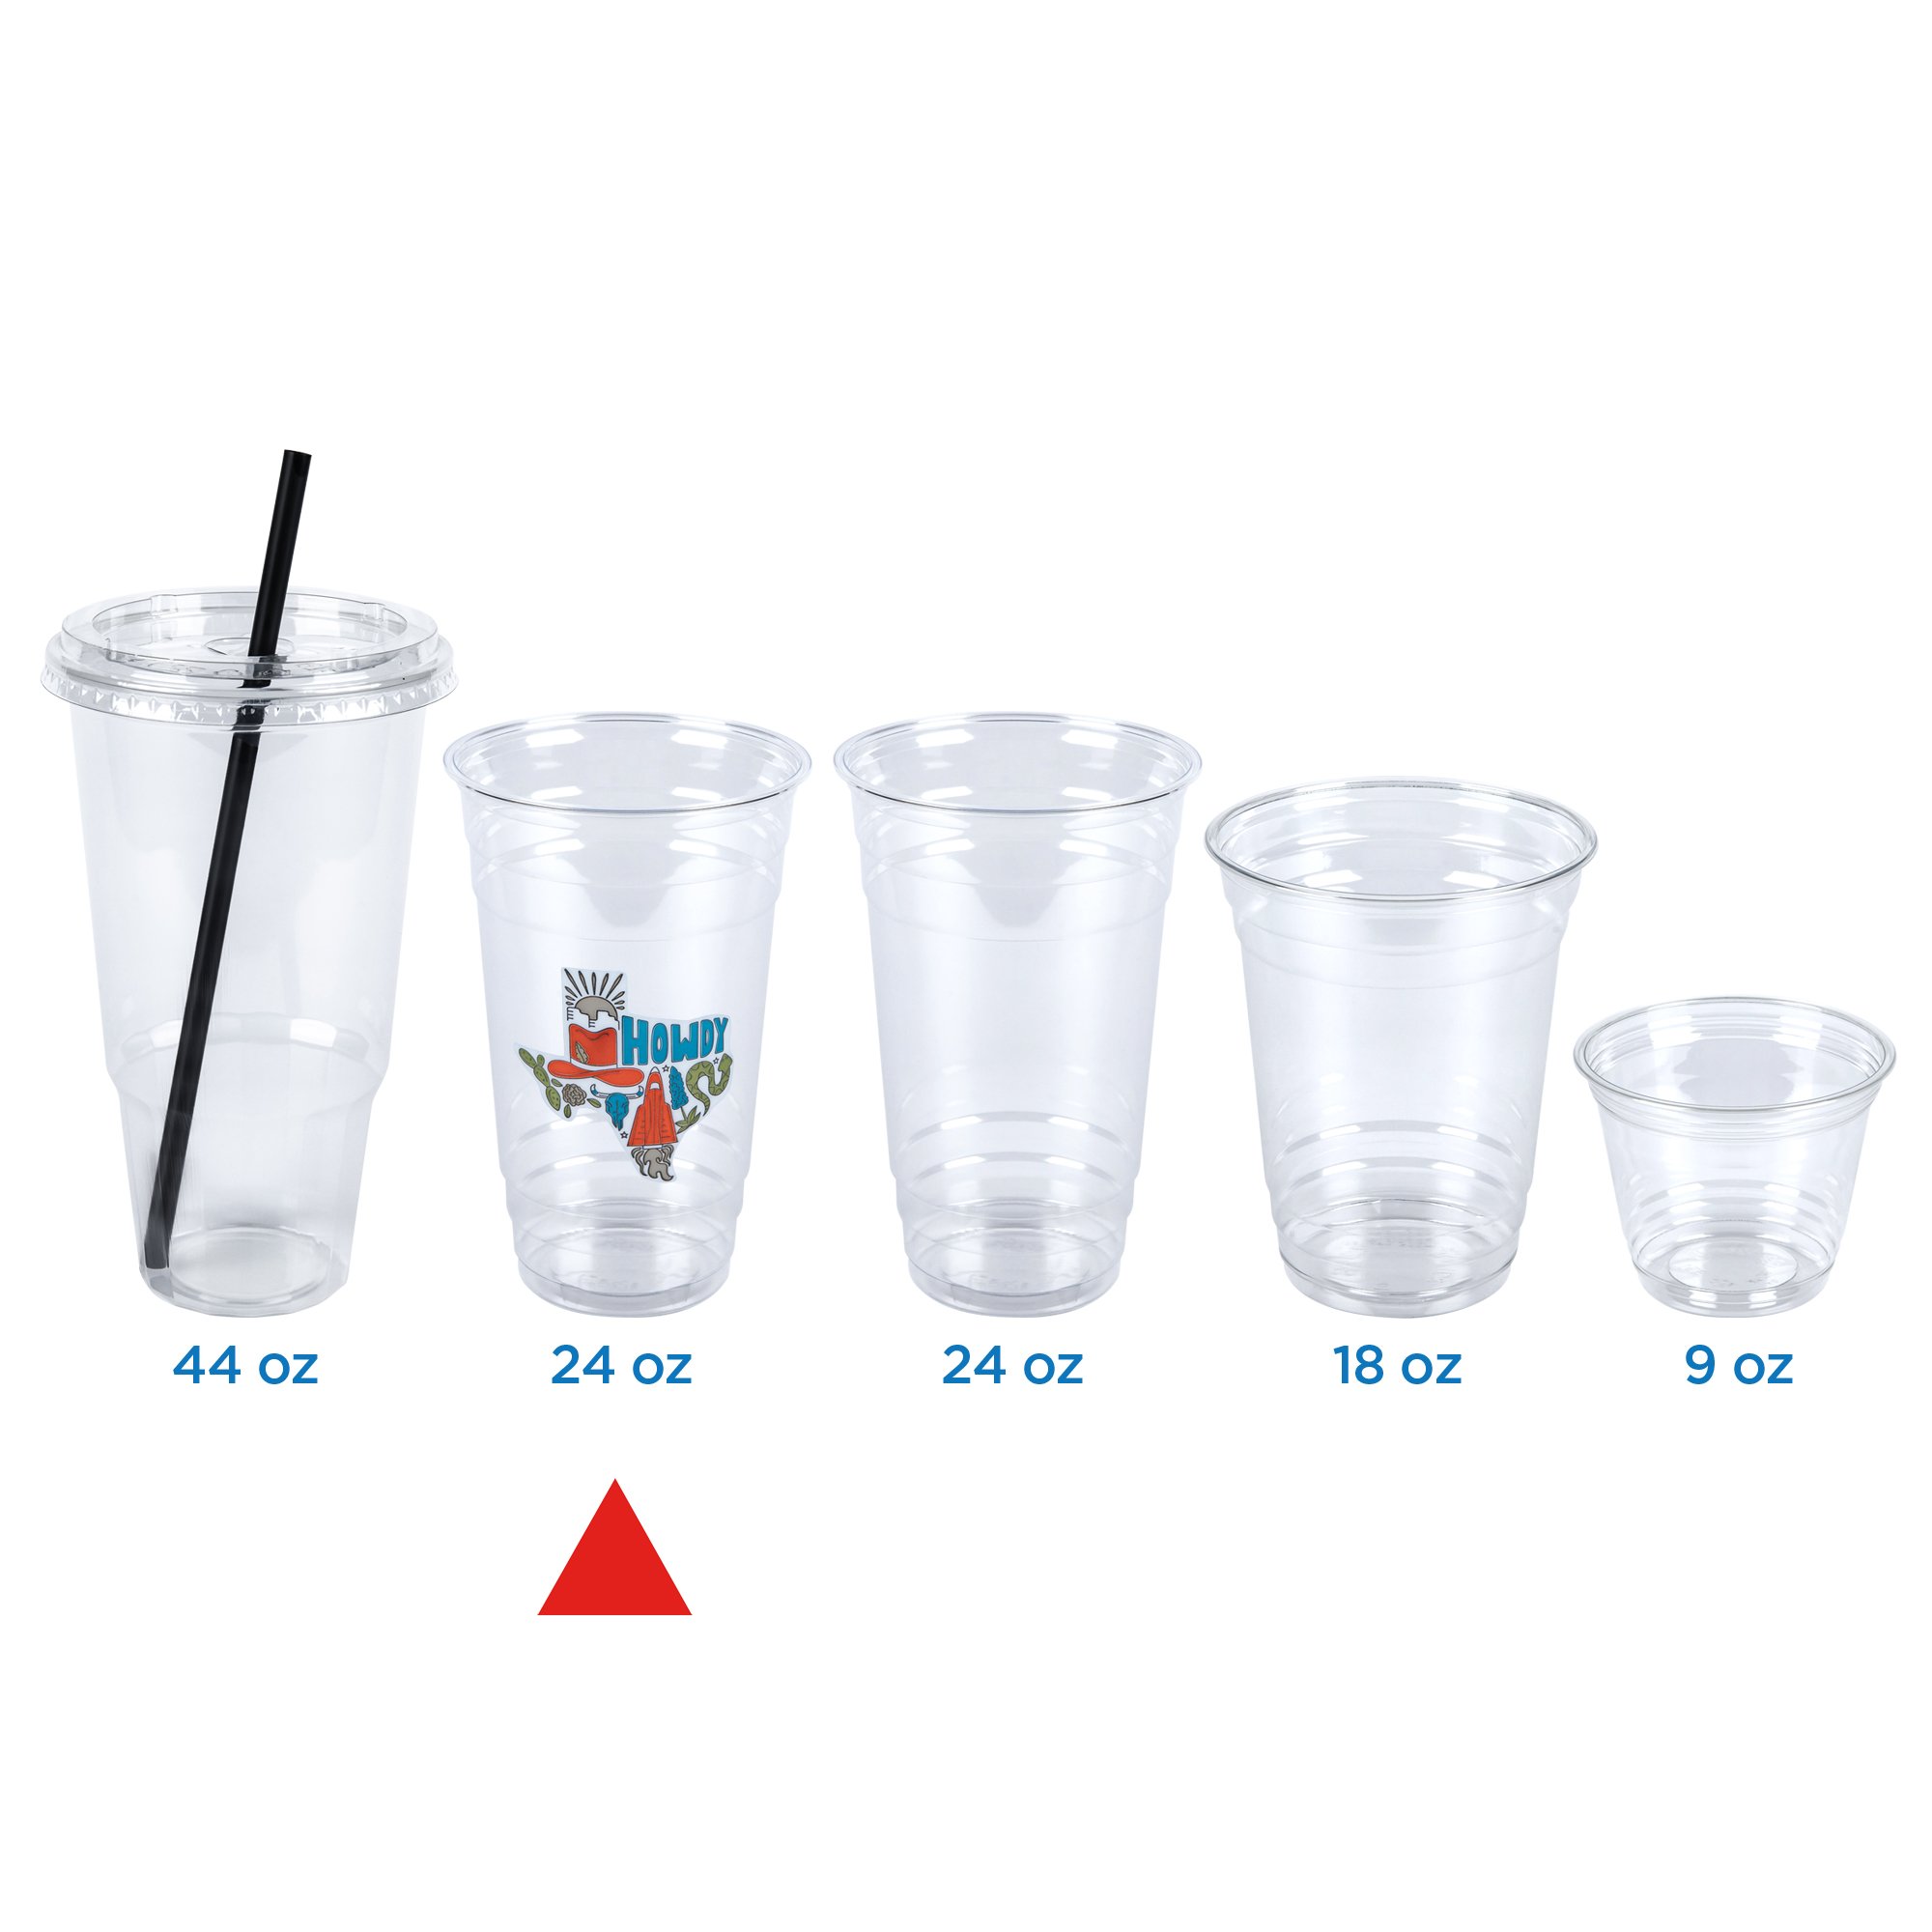 Hill Country Essentials Party 18 oz Plastic Cups - Shop Drinkware at H-E-B